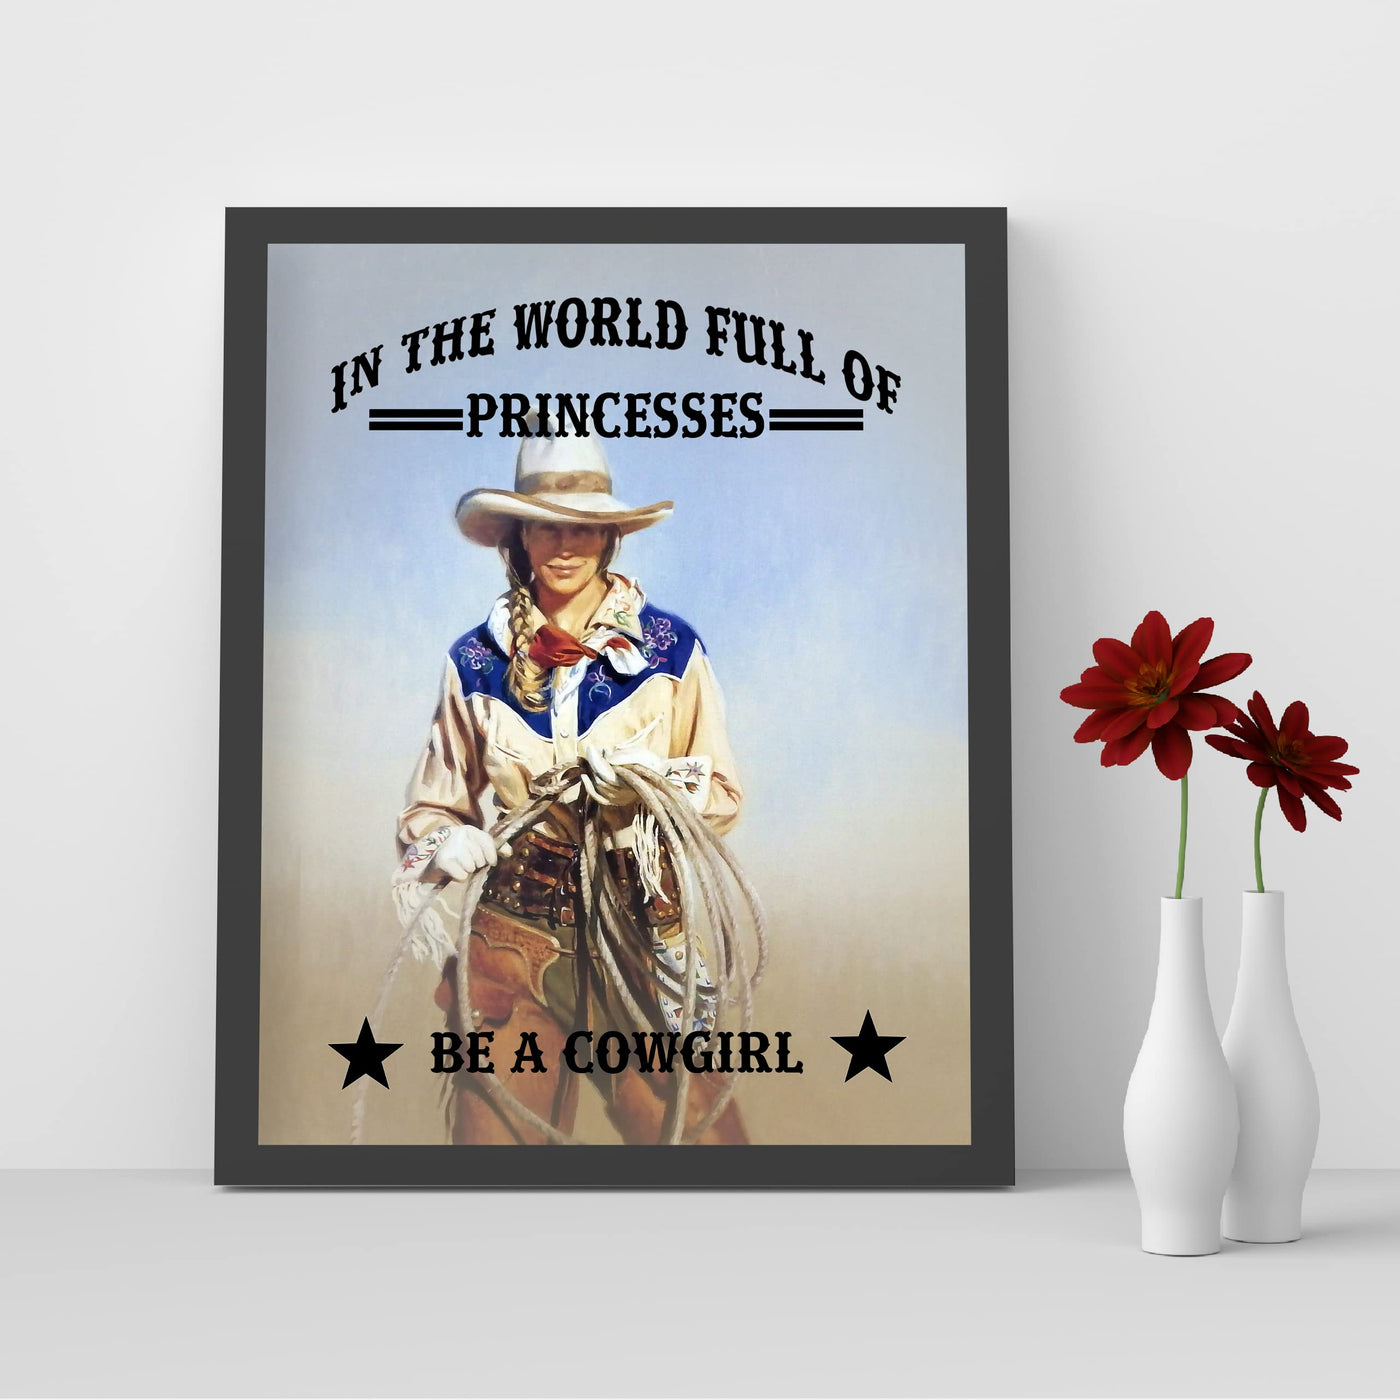 World Full of Princesses- Be a Cowgirl-Western Wall Art Sign -10 x 8" Woman Holding Rope Picture Print -Ready to Frame. Country Rustic Decor for Home-Lodge-Camp-Cabin. Great Gift for All Cowgirls!